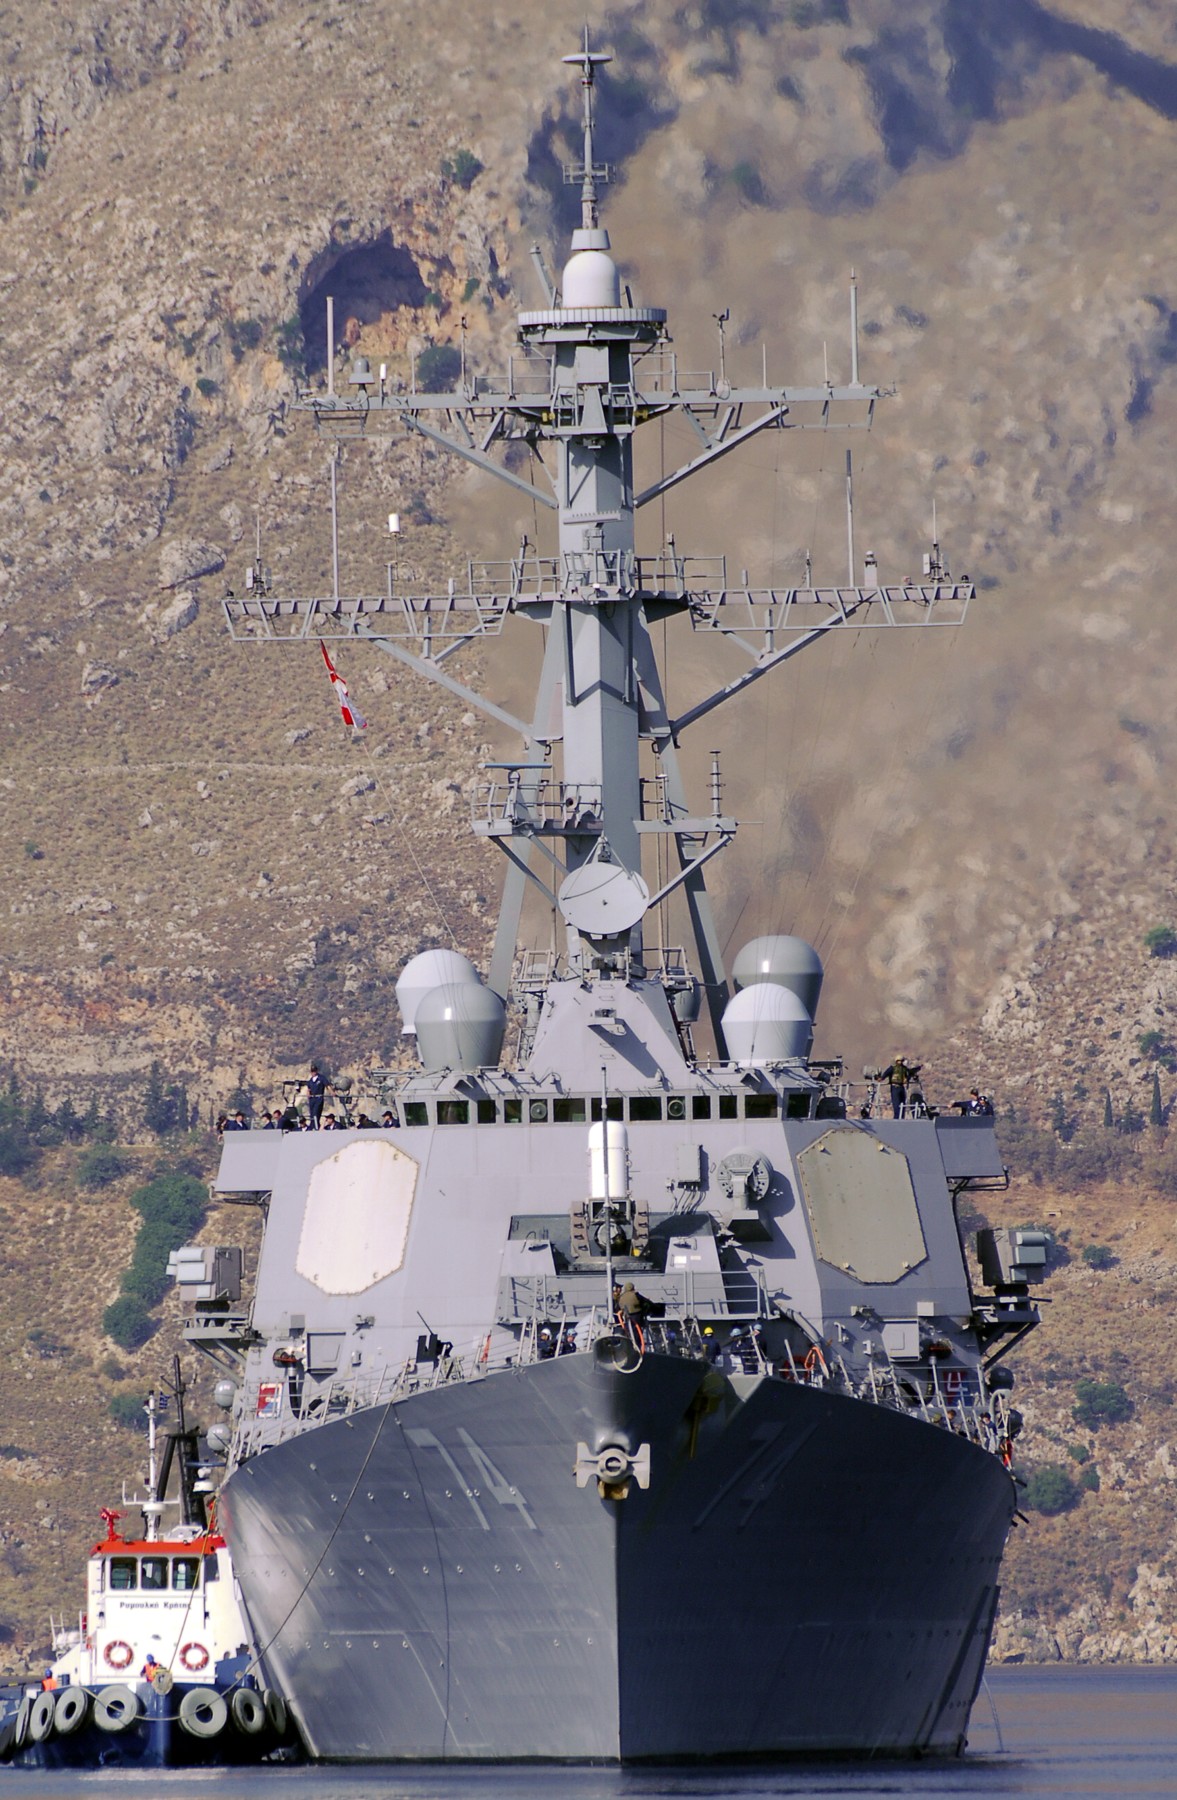 ddg-74 uss mcfaul guided missile destroyer arleigh burke class aegis bmd 38